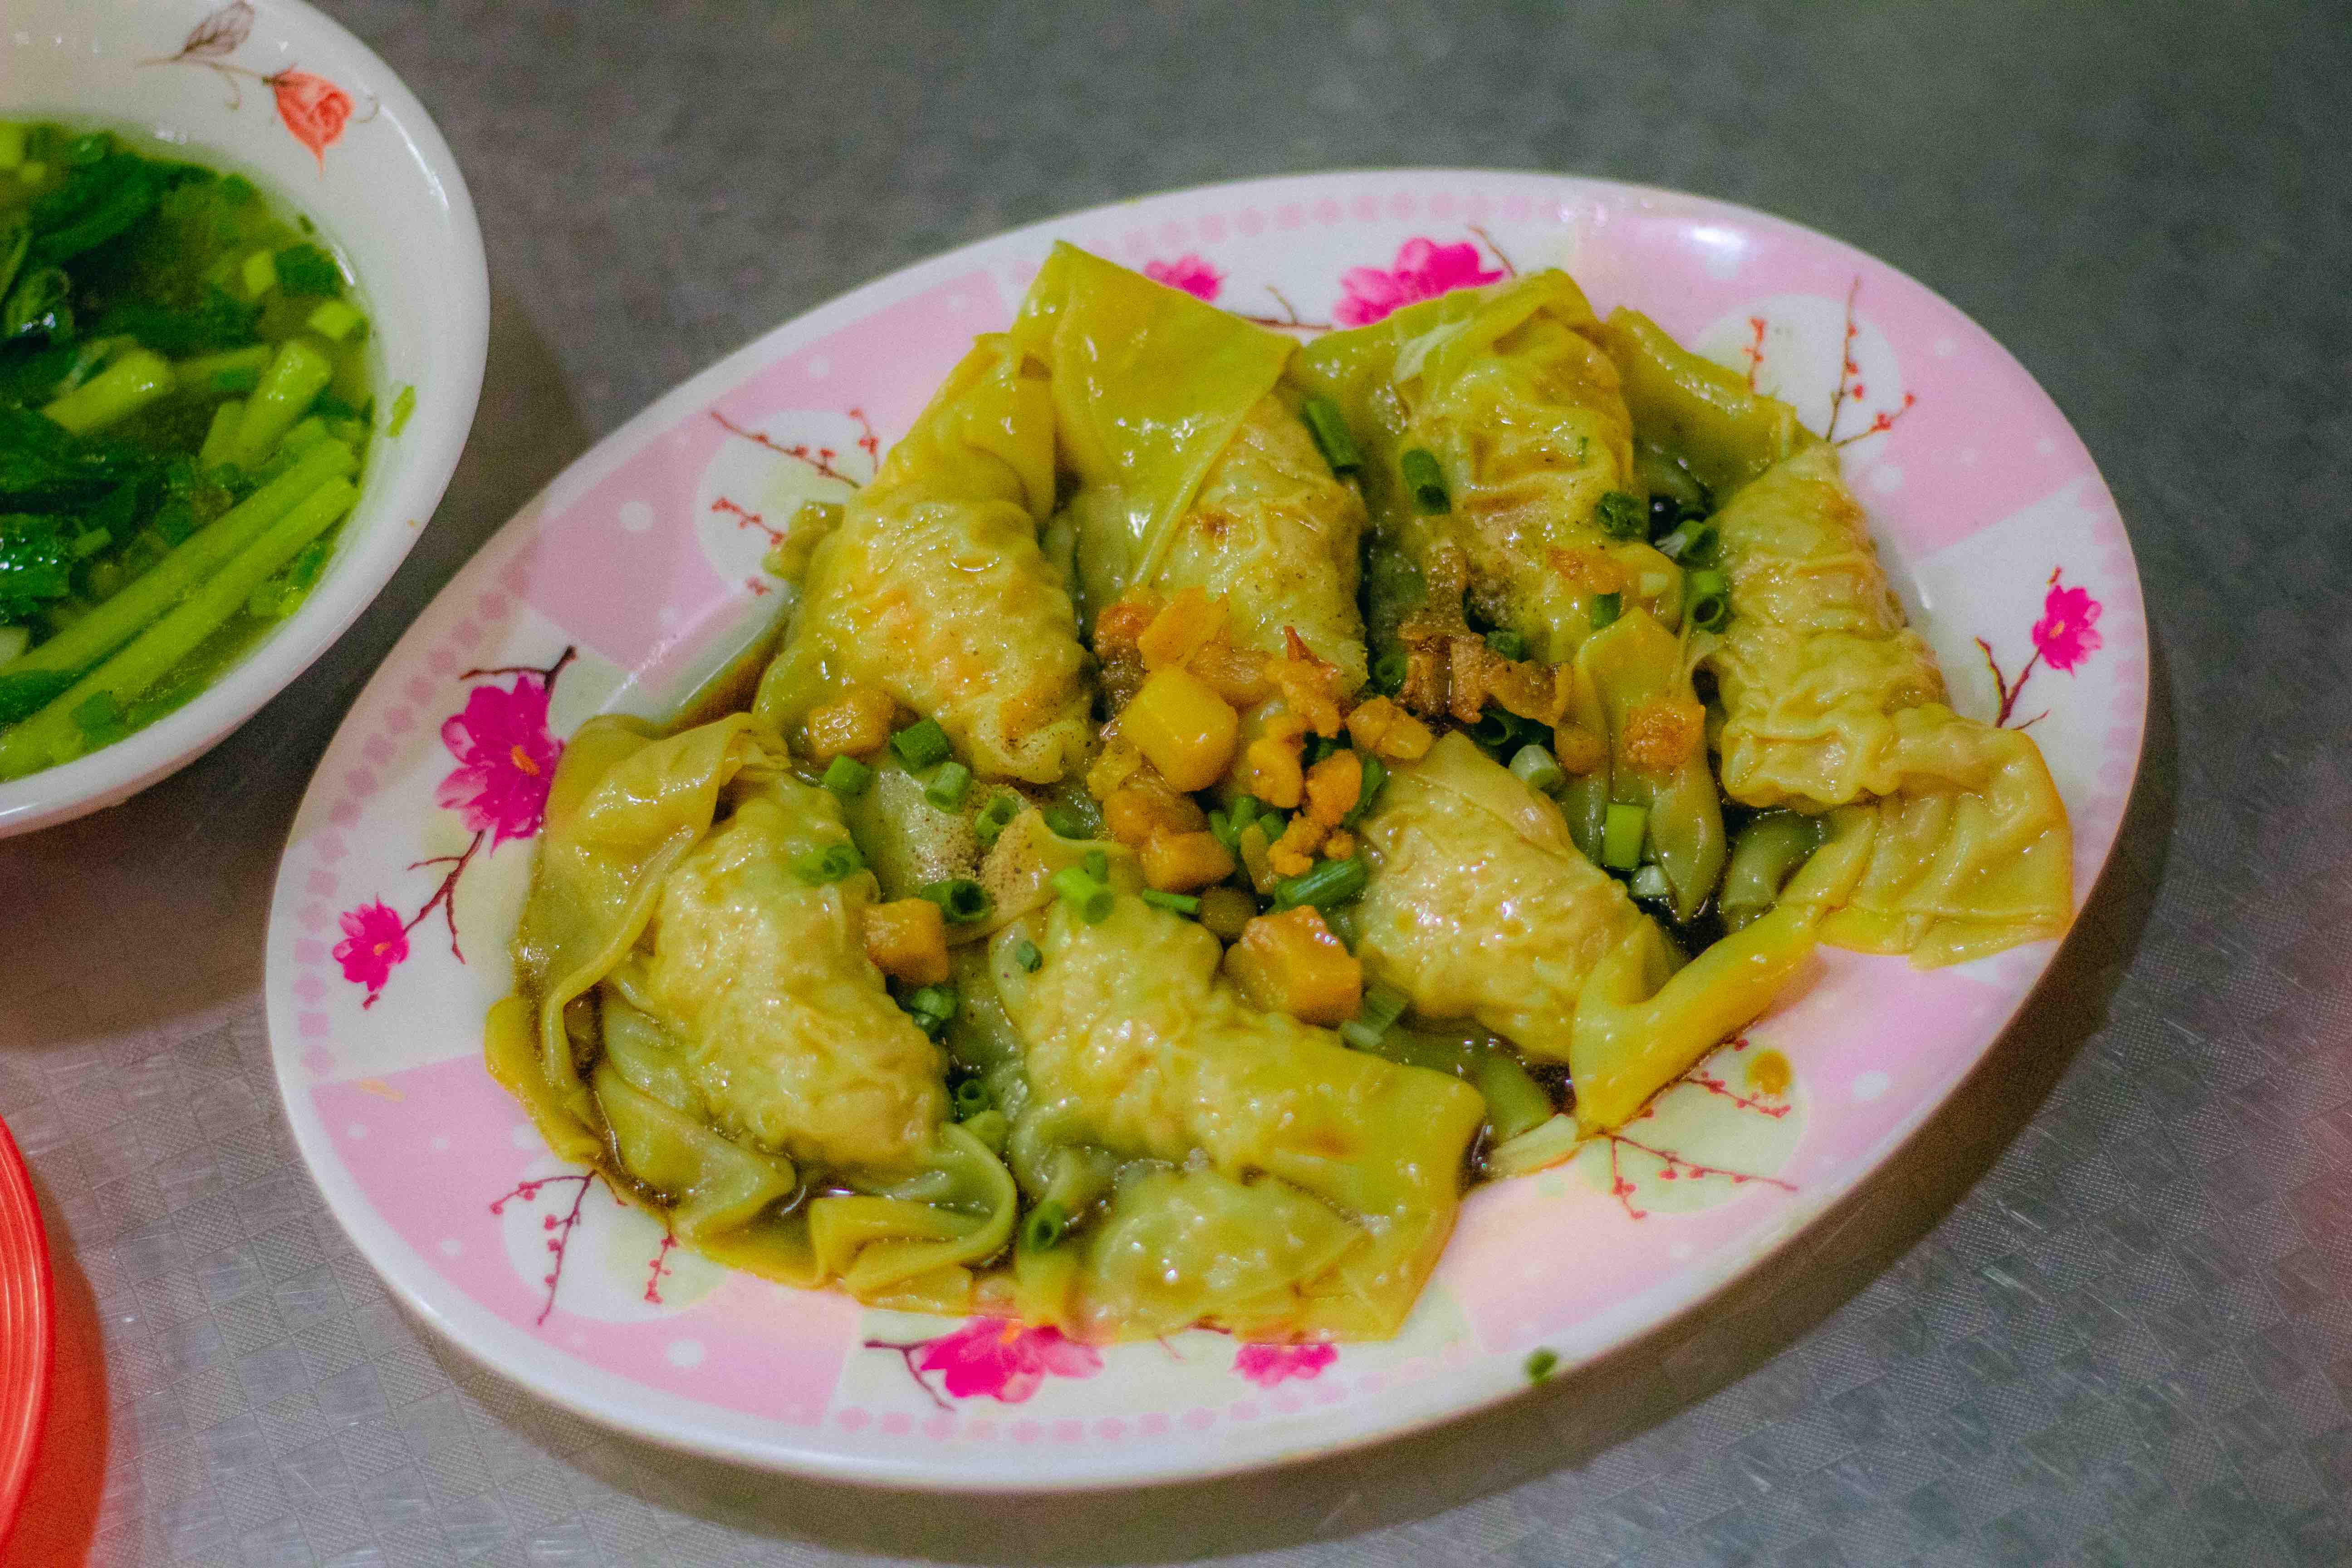 A dish of stir-fried shuijiao with oyster sauce topped with pork greaves at 162 Ha Ton Quyen Street, District 11, Ho Chi Minh City, Vietnam. Photo: Linh To / Tuoi Tre News